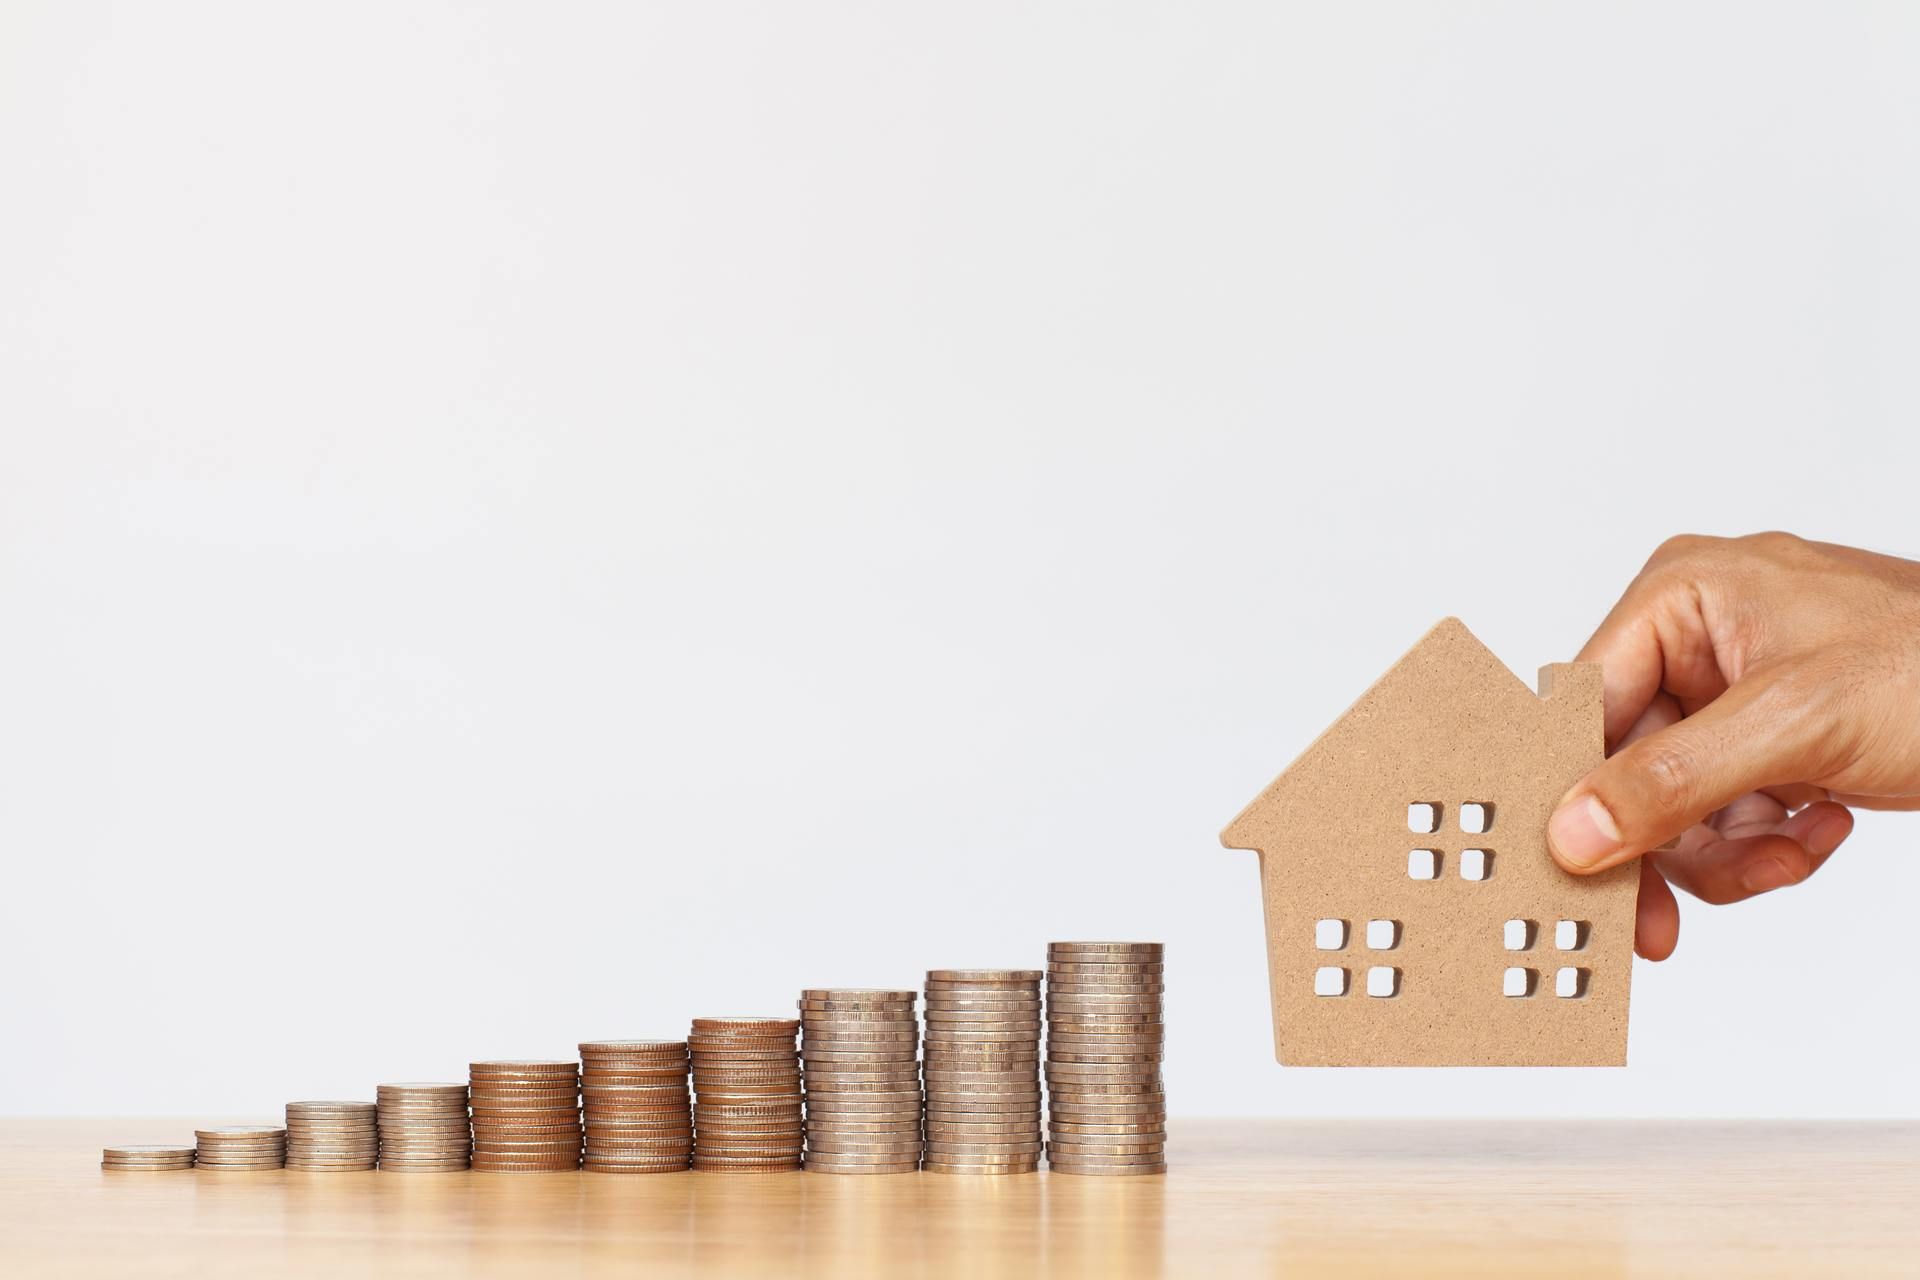 How much deposit do you need for a house?